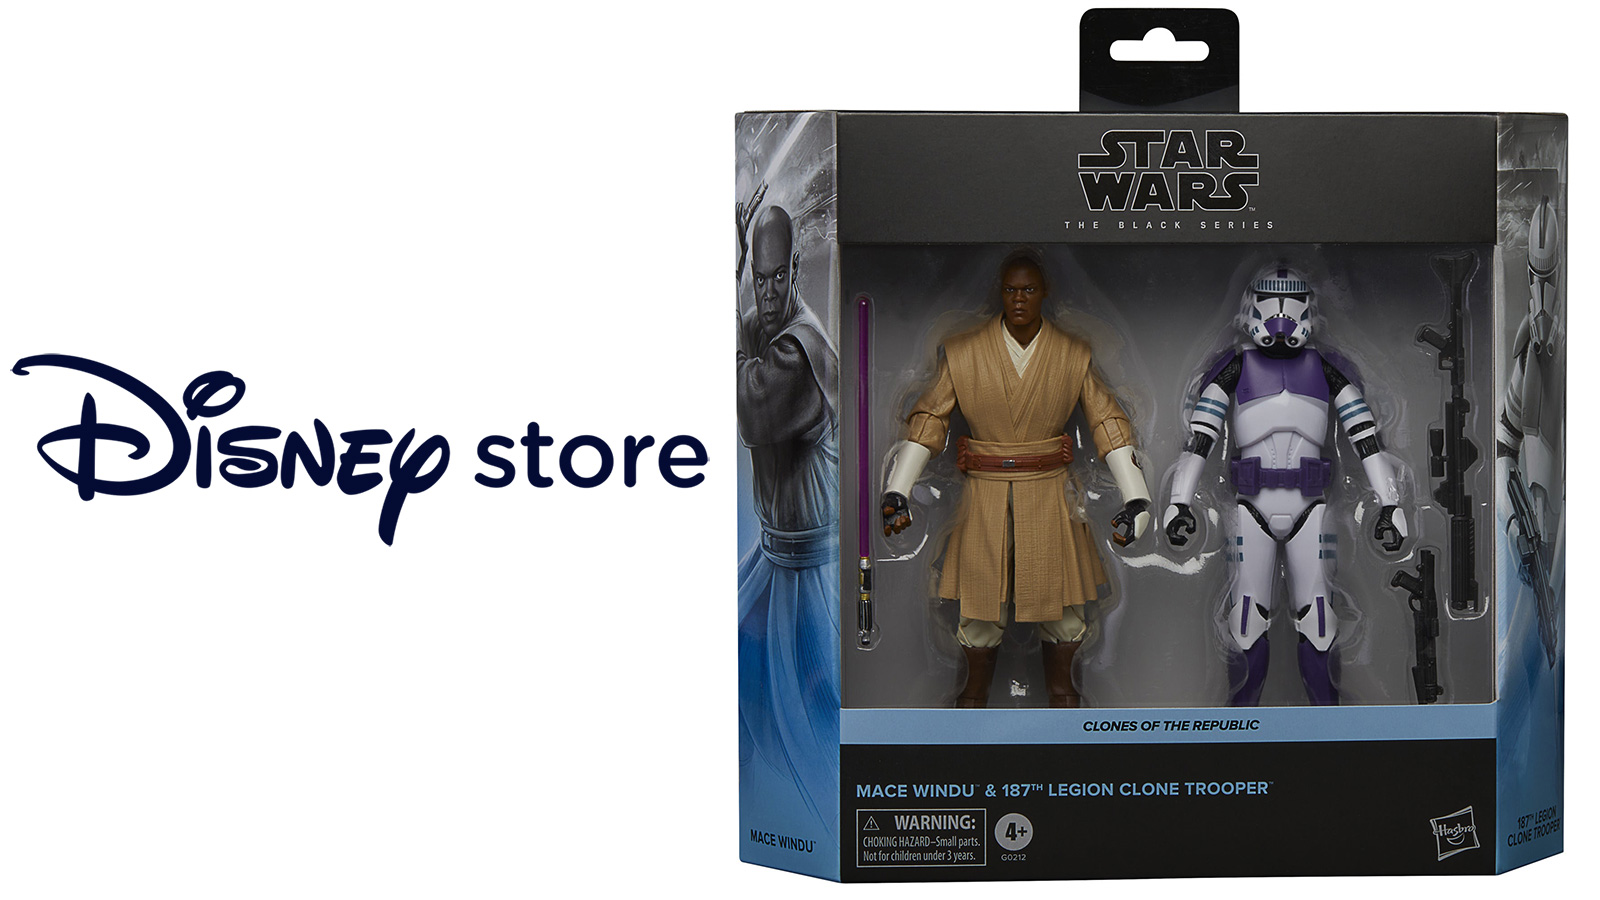 Exclusive TBS 6-Inch Mace Windu & 187th Clone Trooper Set Available May 4th At The Disney Store